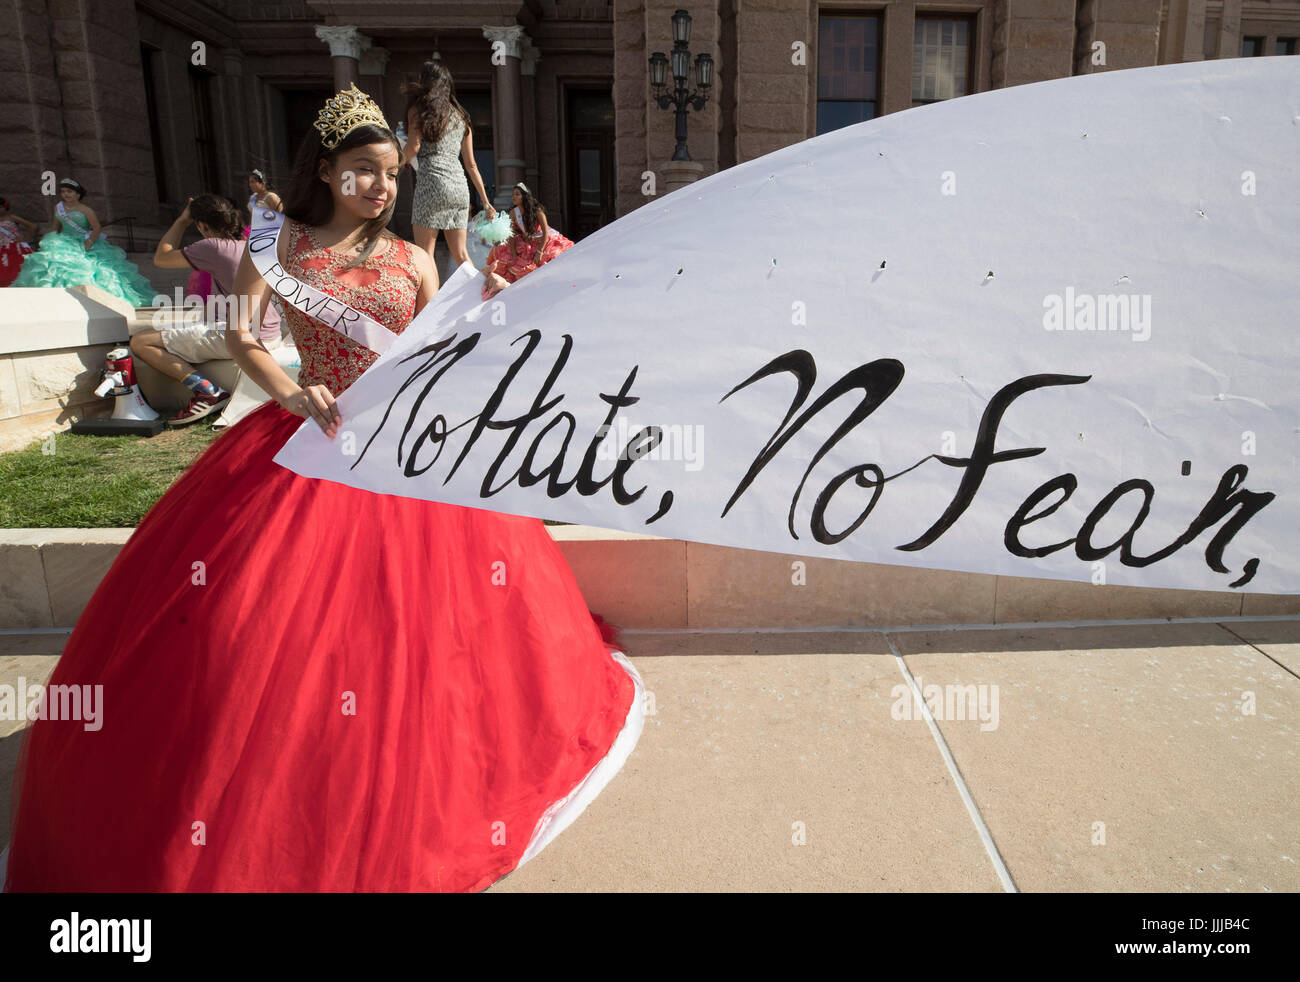 Teen girls wearing Mexican-style quinceanera dresses at the Texas Capitol protest SB4, passed by the legislature and signed by the governor in Spring 2017, a'Show me your papers' bill authorizing police to ask people to prove their immigration status at any time. Stock Photo